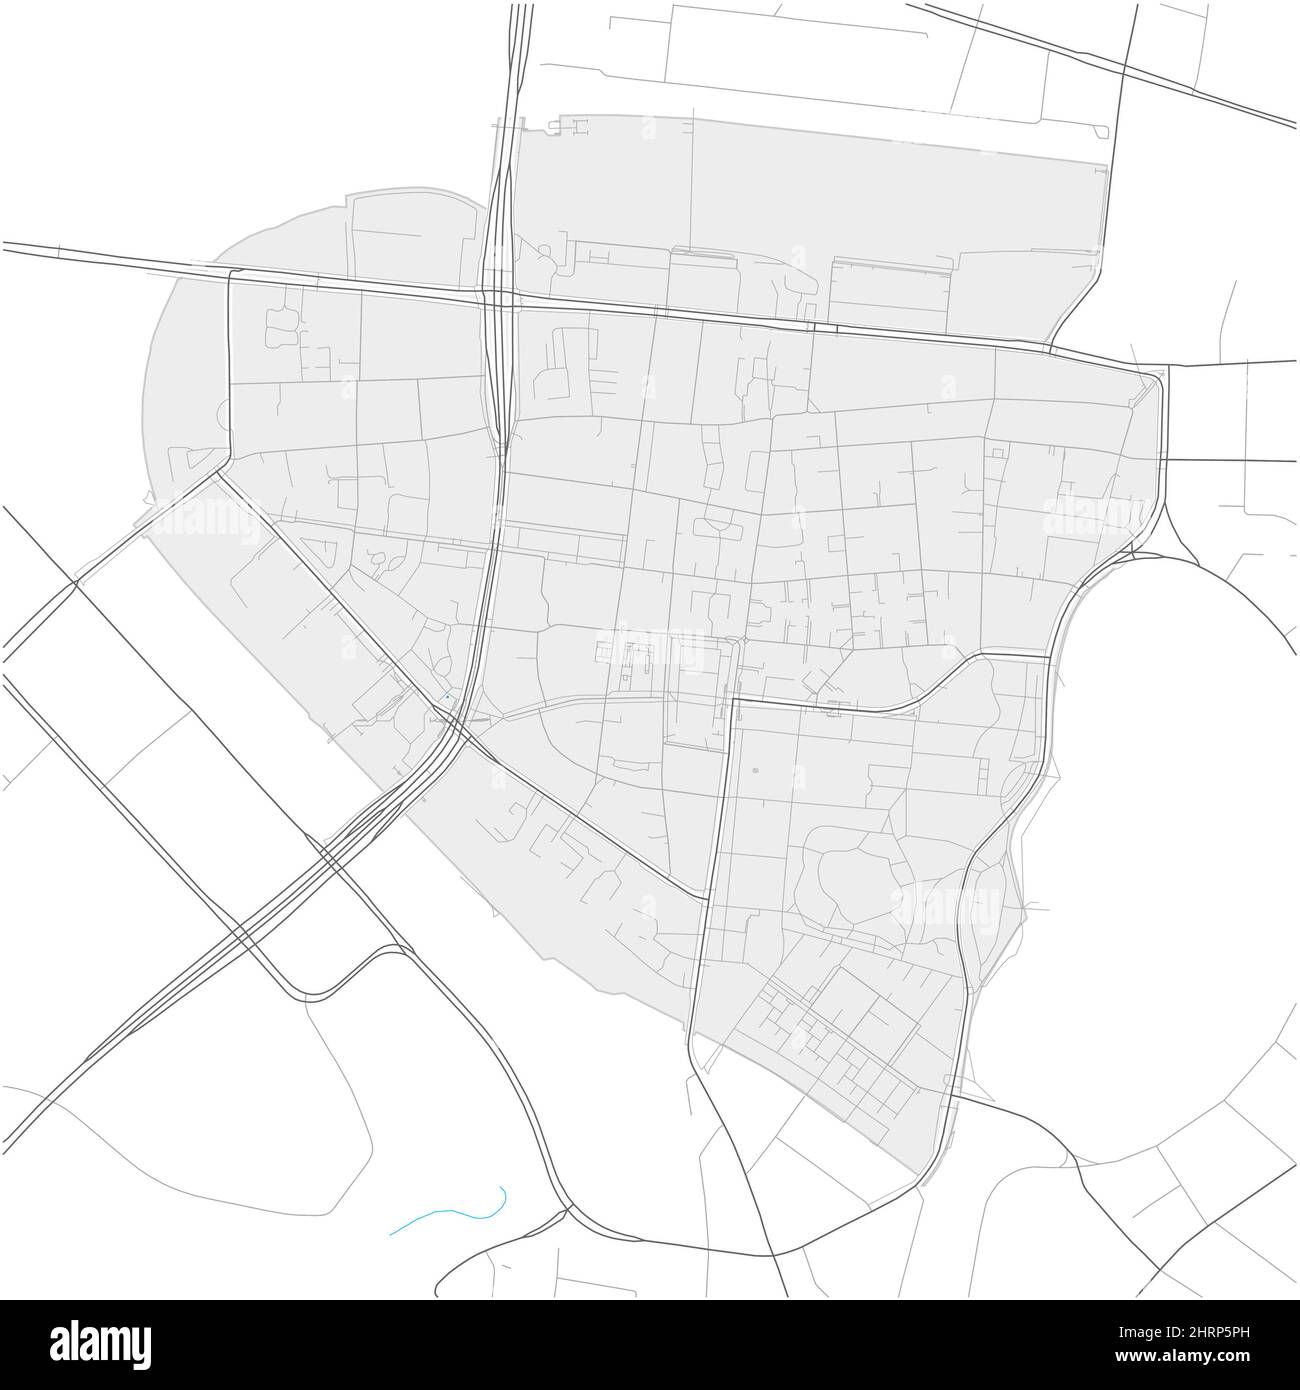 Schwanthalerhöhe, München, DEUTSCHLAND, high detail vector map with city boundaries and editable paths. White outlines for main roads. Many smaller pa Stock Vector